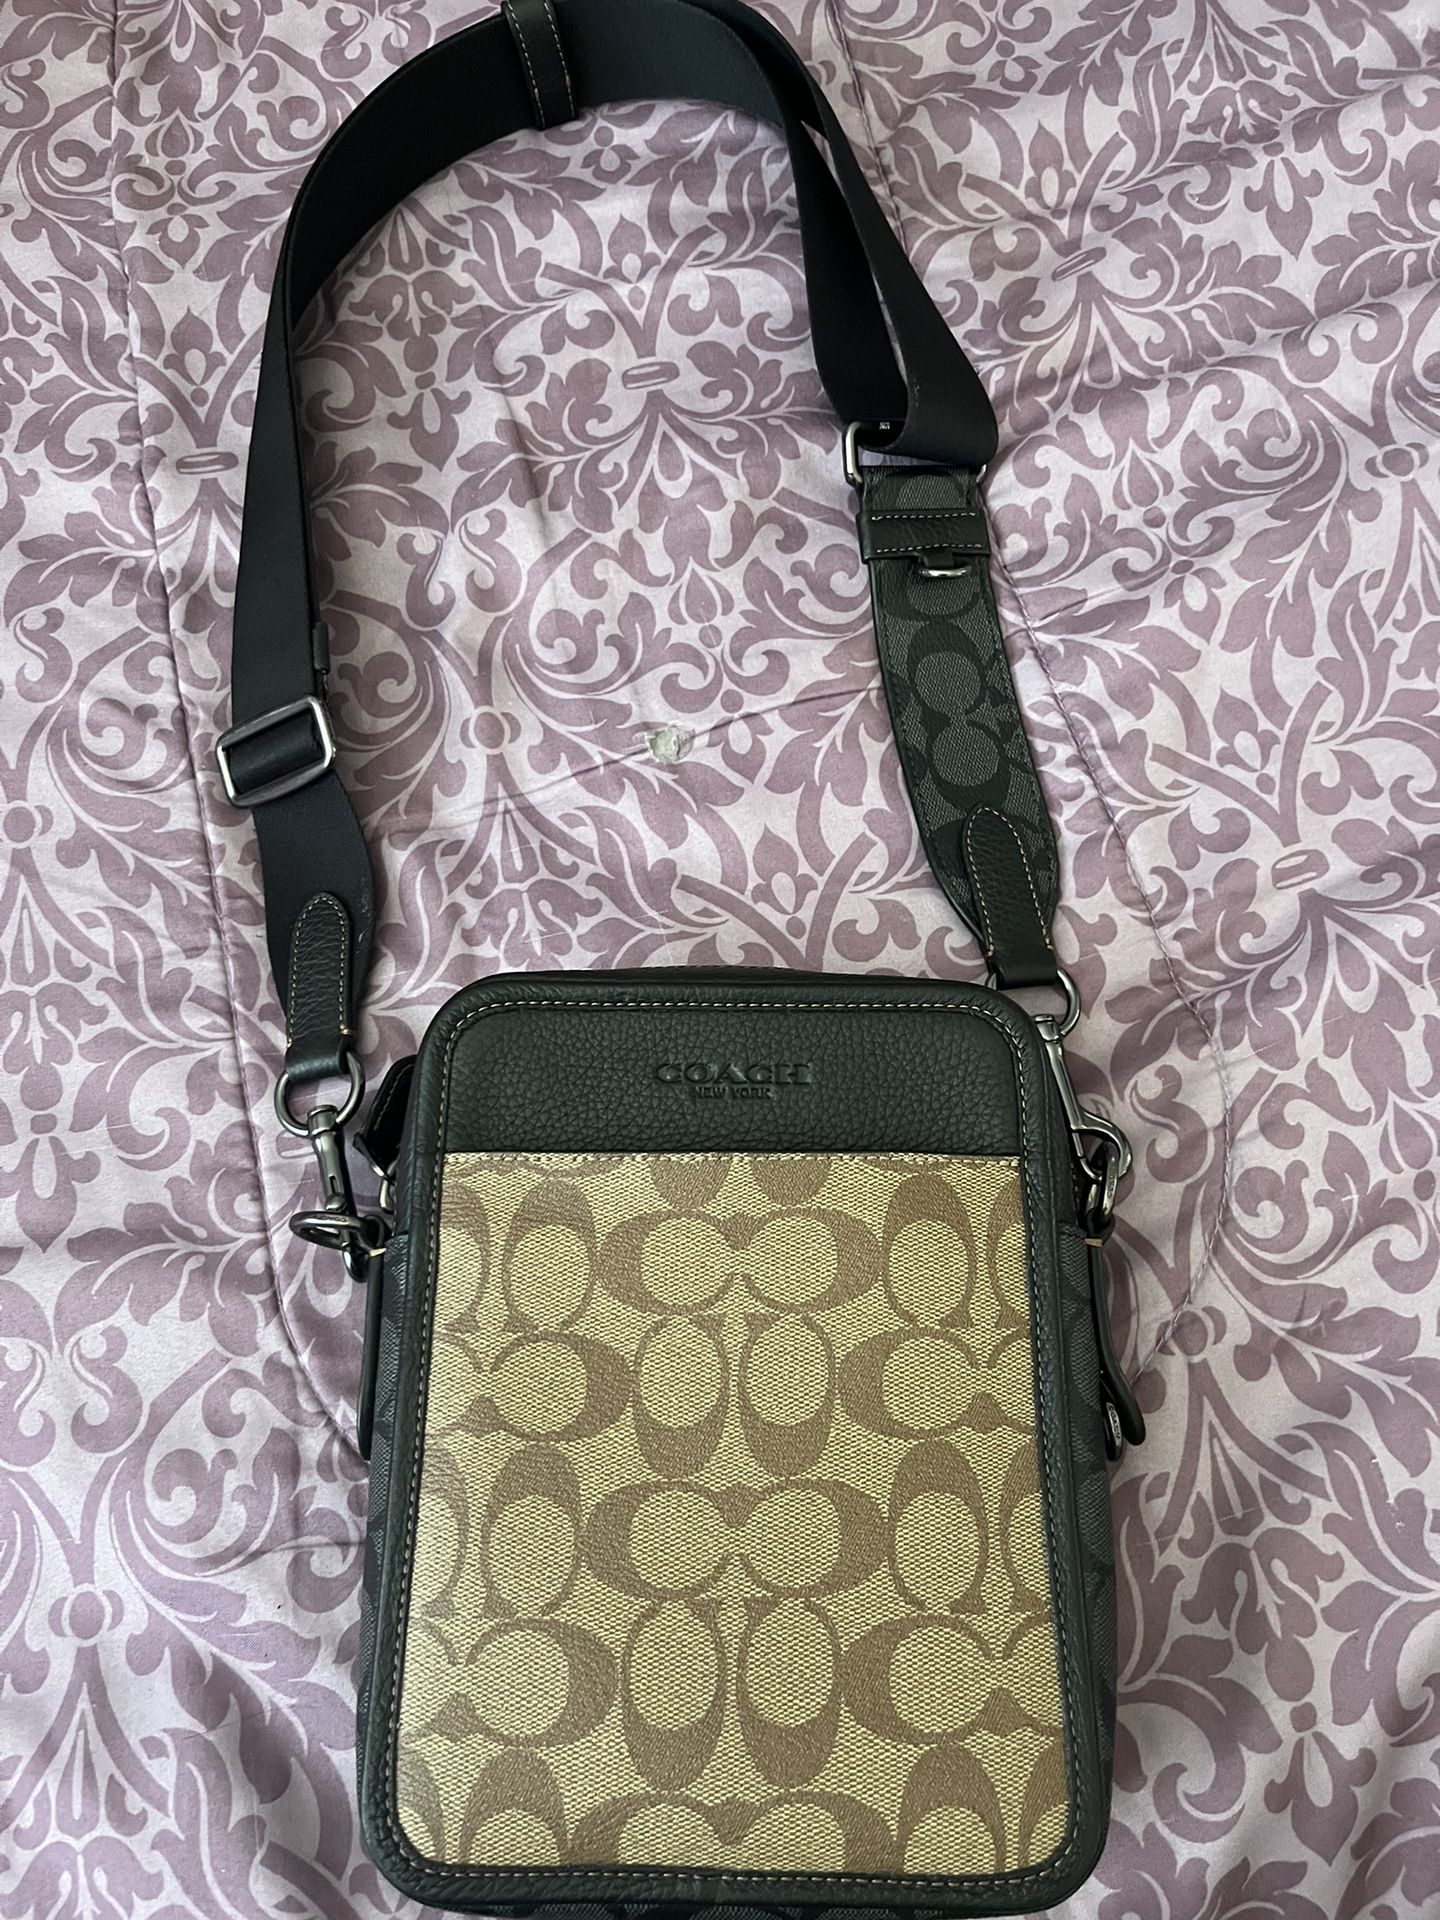 Coach Side Bag for Sale in Arvada, CO - OfferUp